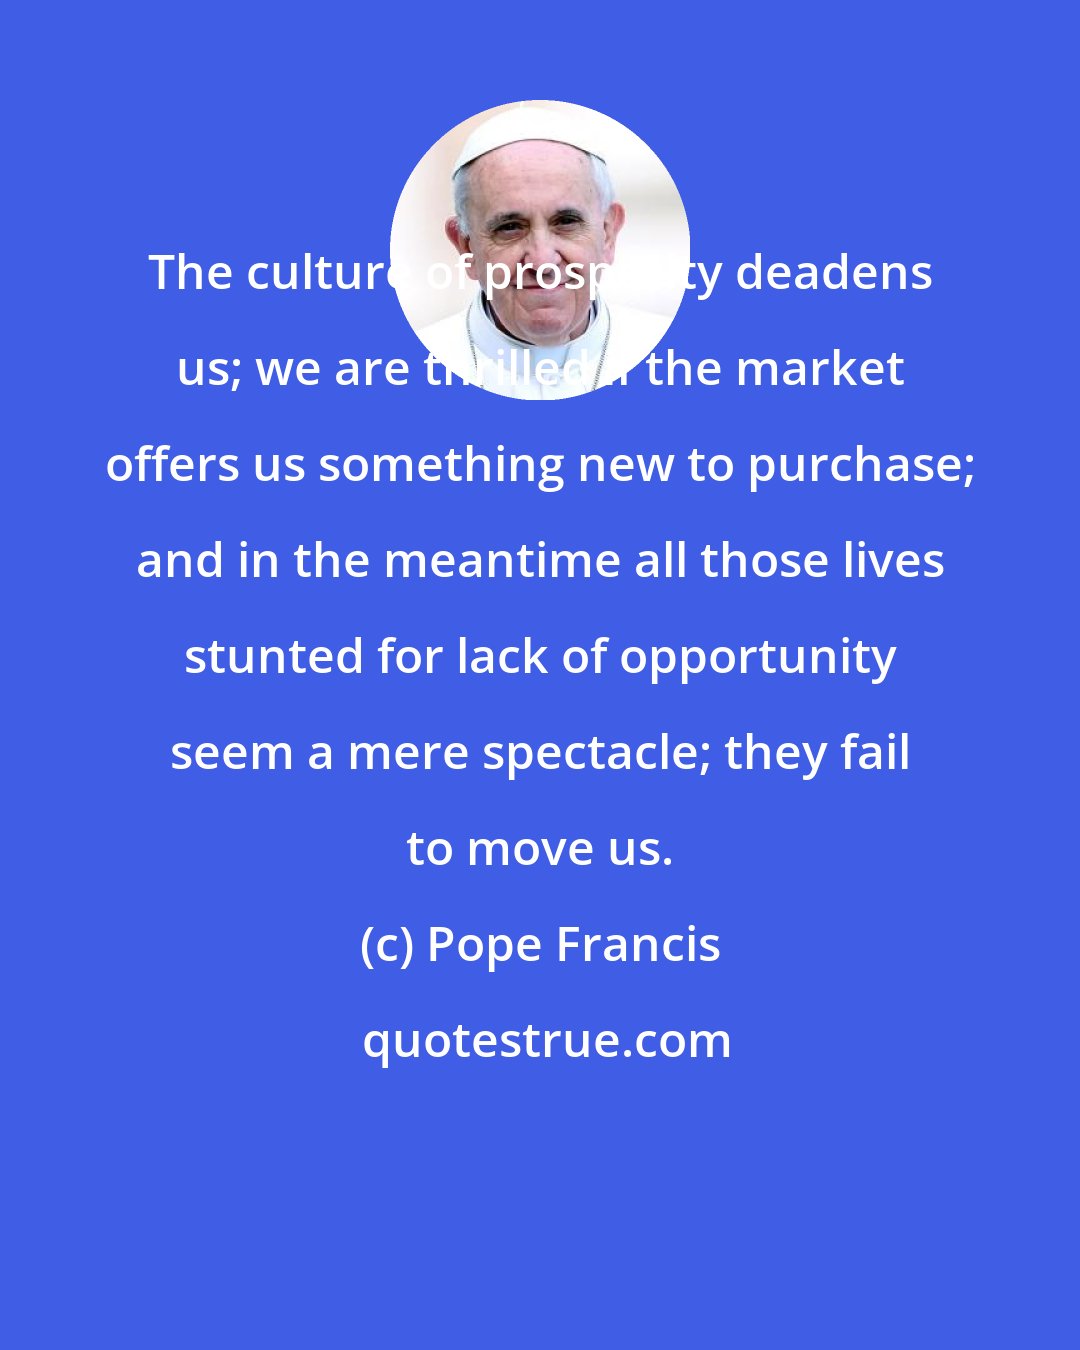 Pope Francis: The culture of prosperity deadens us; we are thrilled if the market offers us something new to purchase; and in the meantime all those lives stunted for lack of opportunity seem a mere spectacle; they fail to move us.